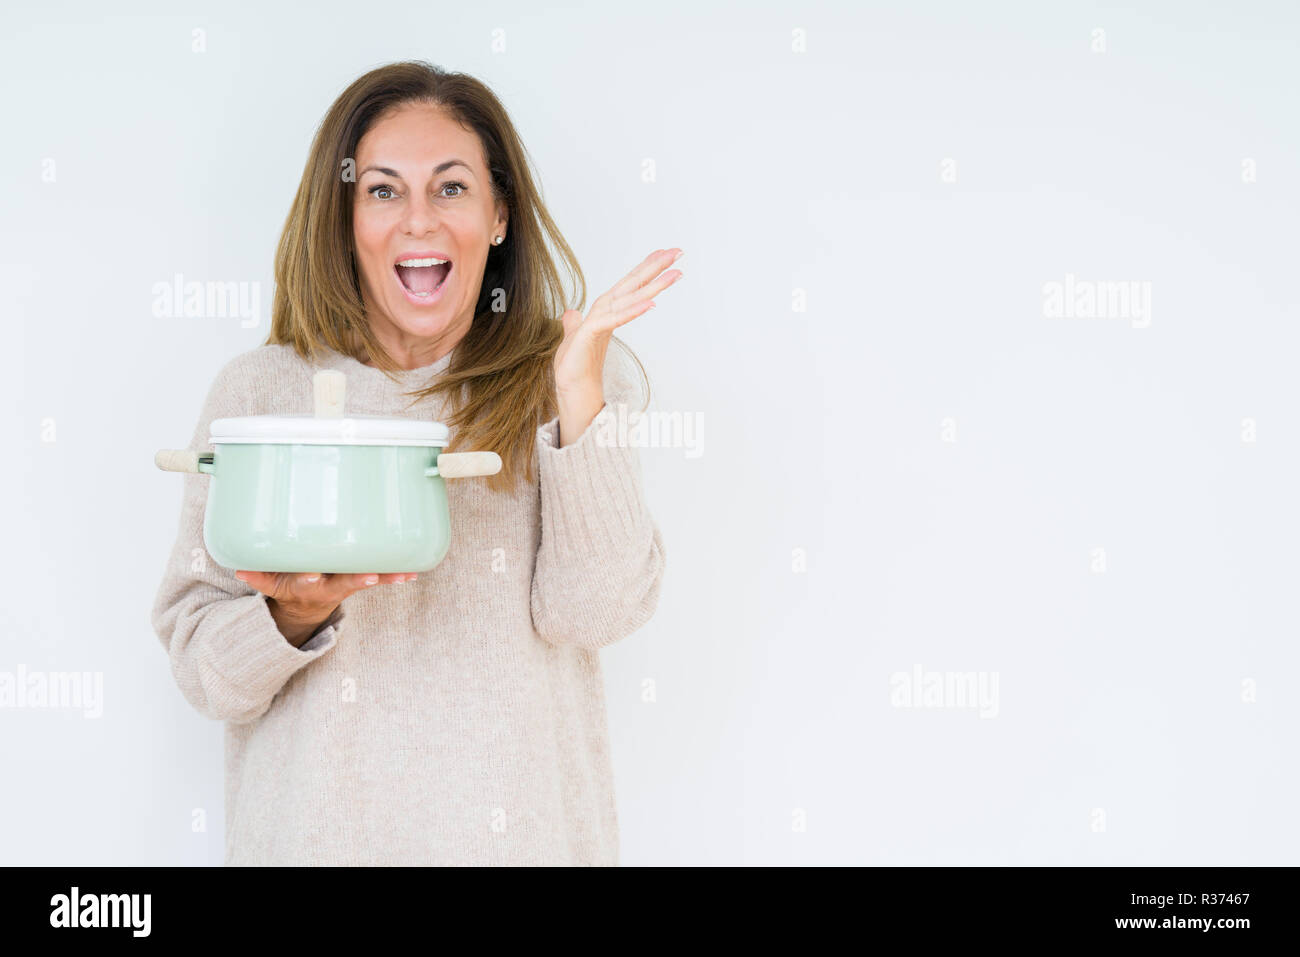 Middle age housewife woman holding iron cooking pot over isolated background very happy and excited, winner expression celebrating victory screaming w Stock Photo